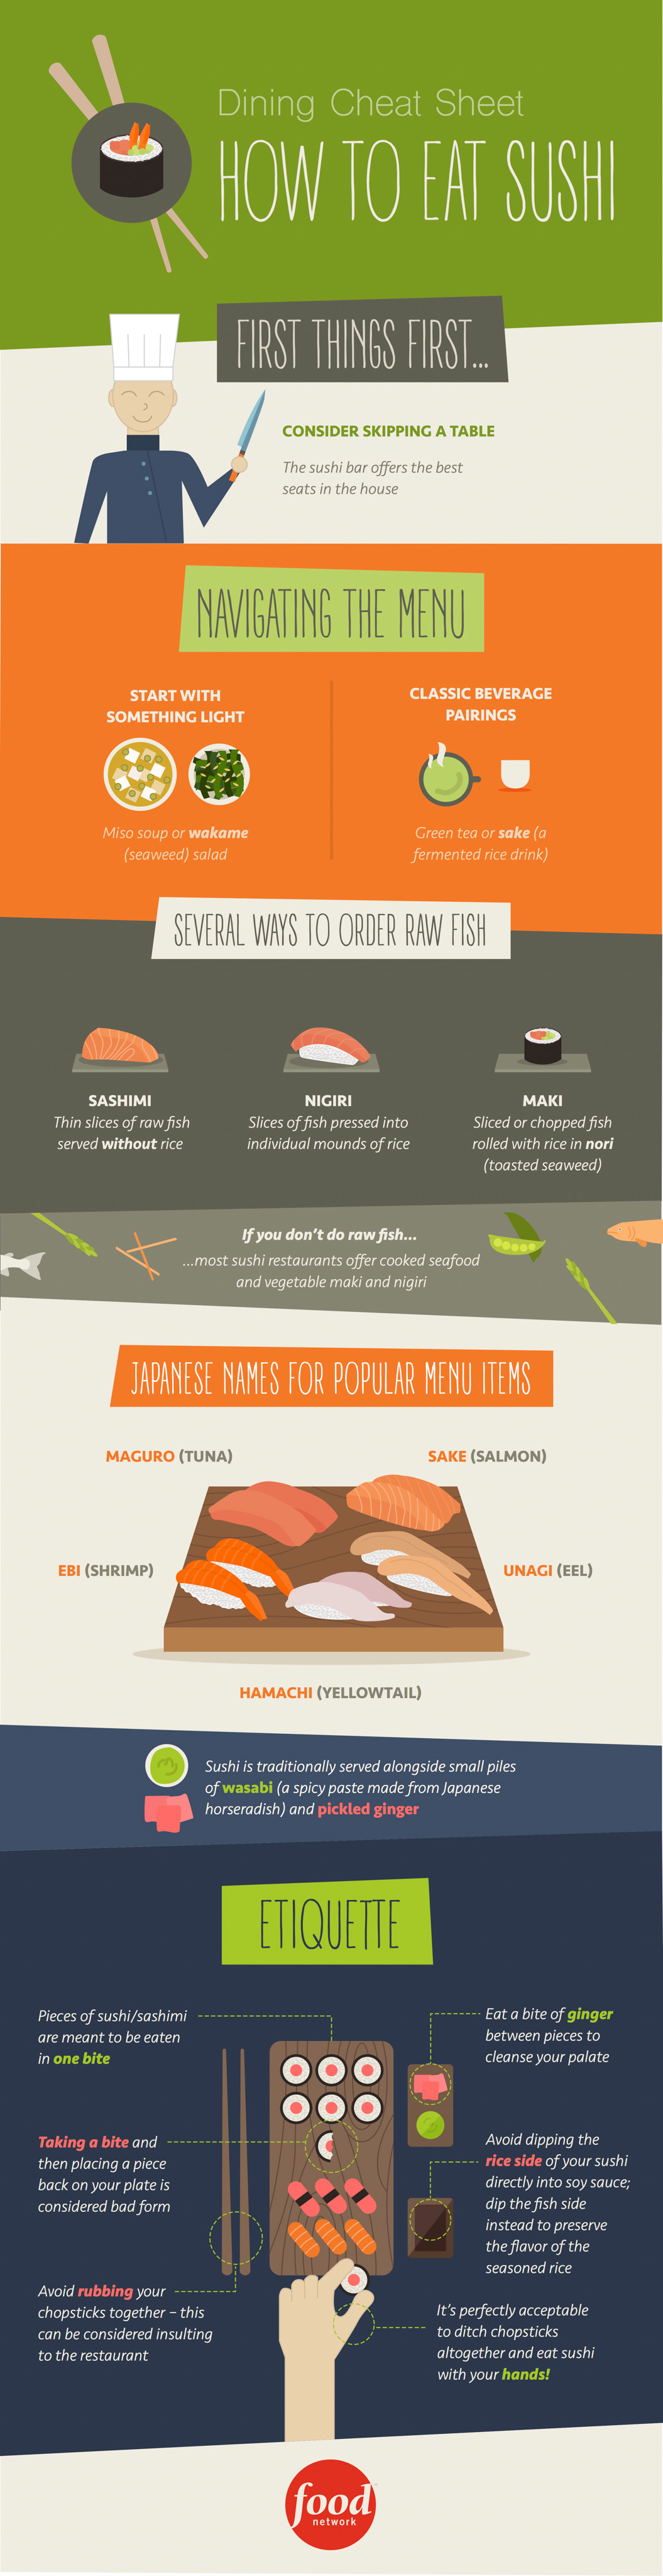 Dining Cheat Sheet: How to Eat Sushi